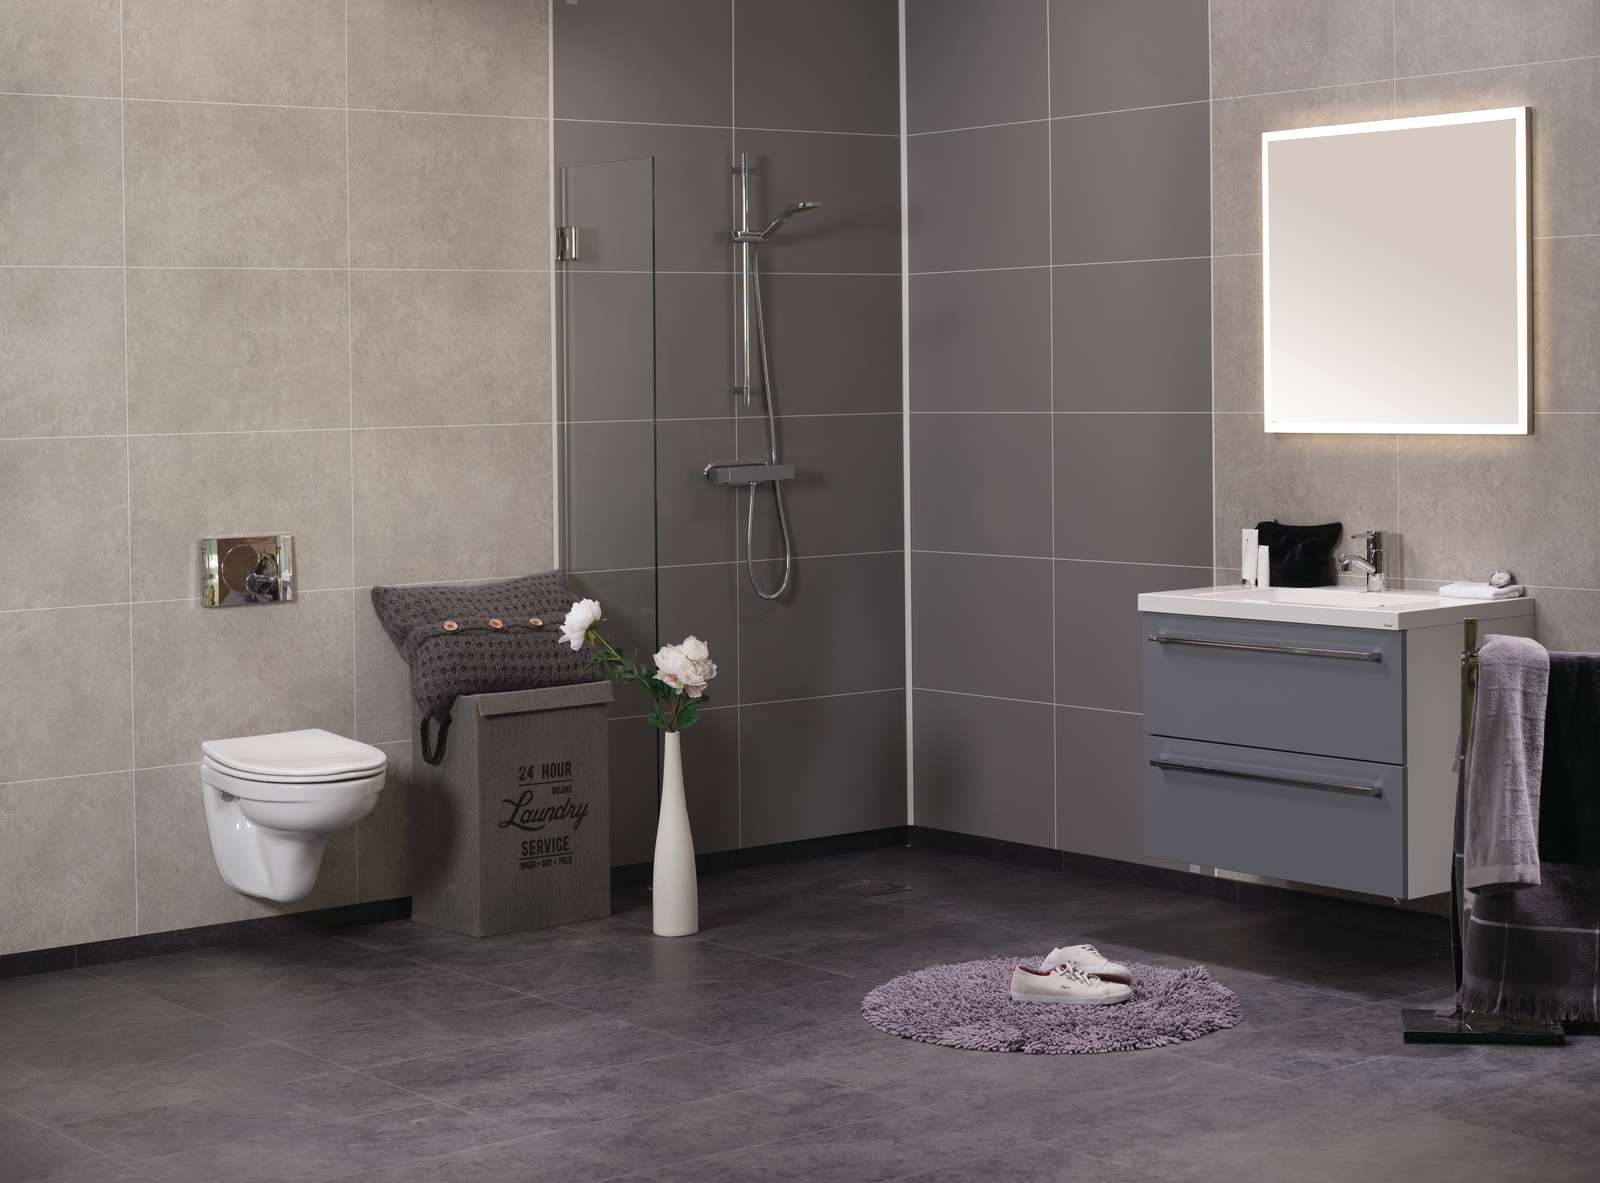 Grey Sahara 24 x 16 - Bathroom wall surrounds shown in the shower